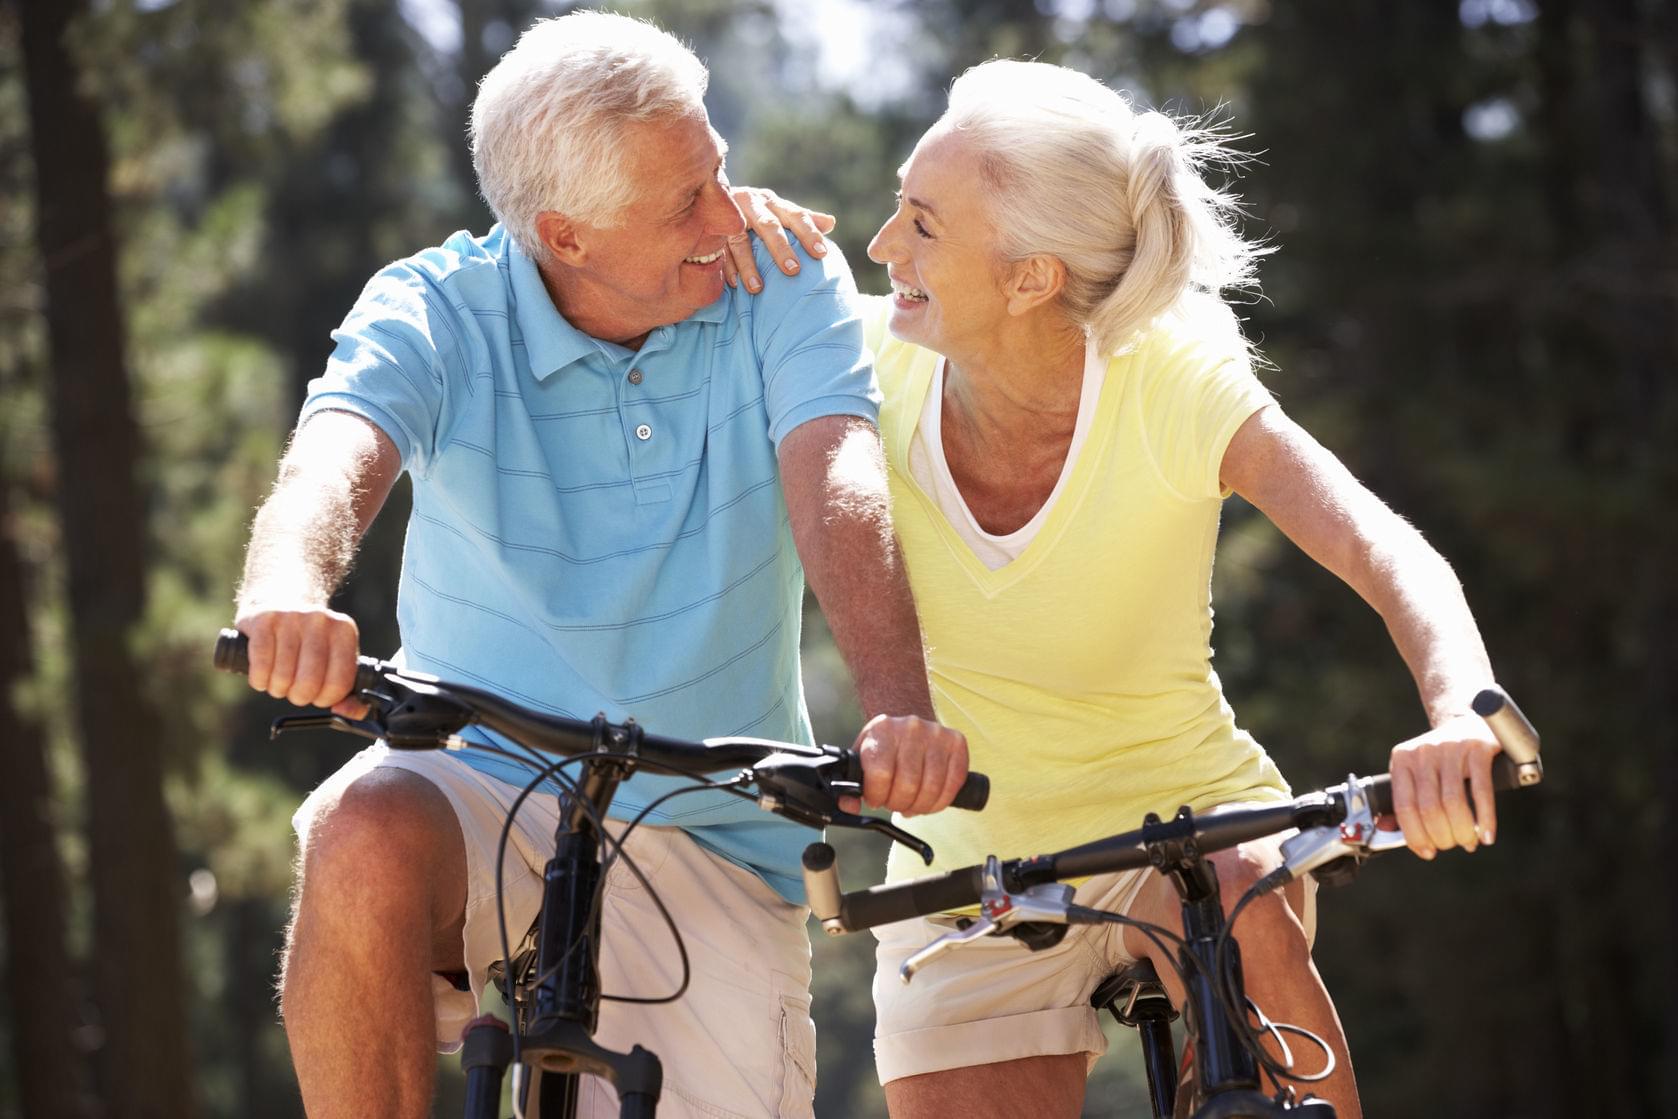 7 considerations for choosing your perfect retirement home